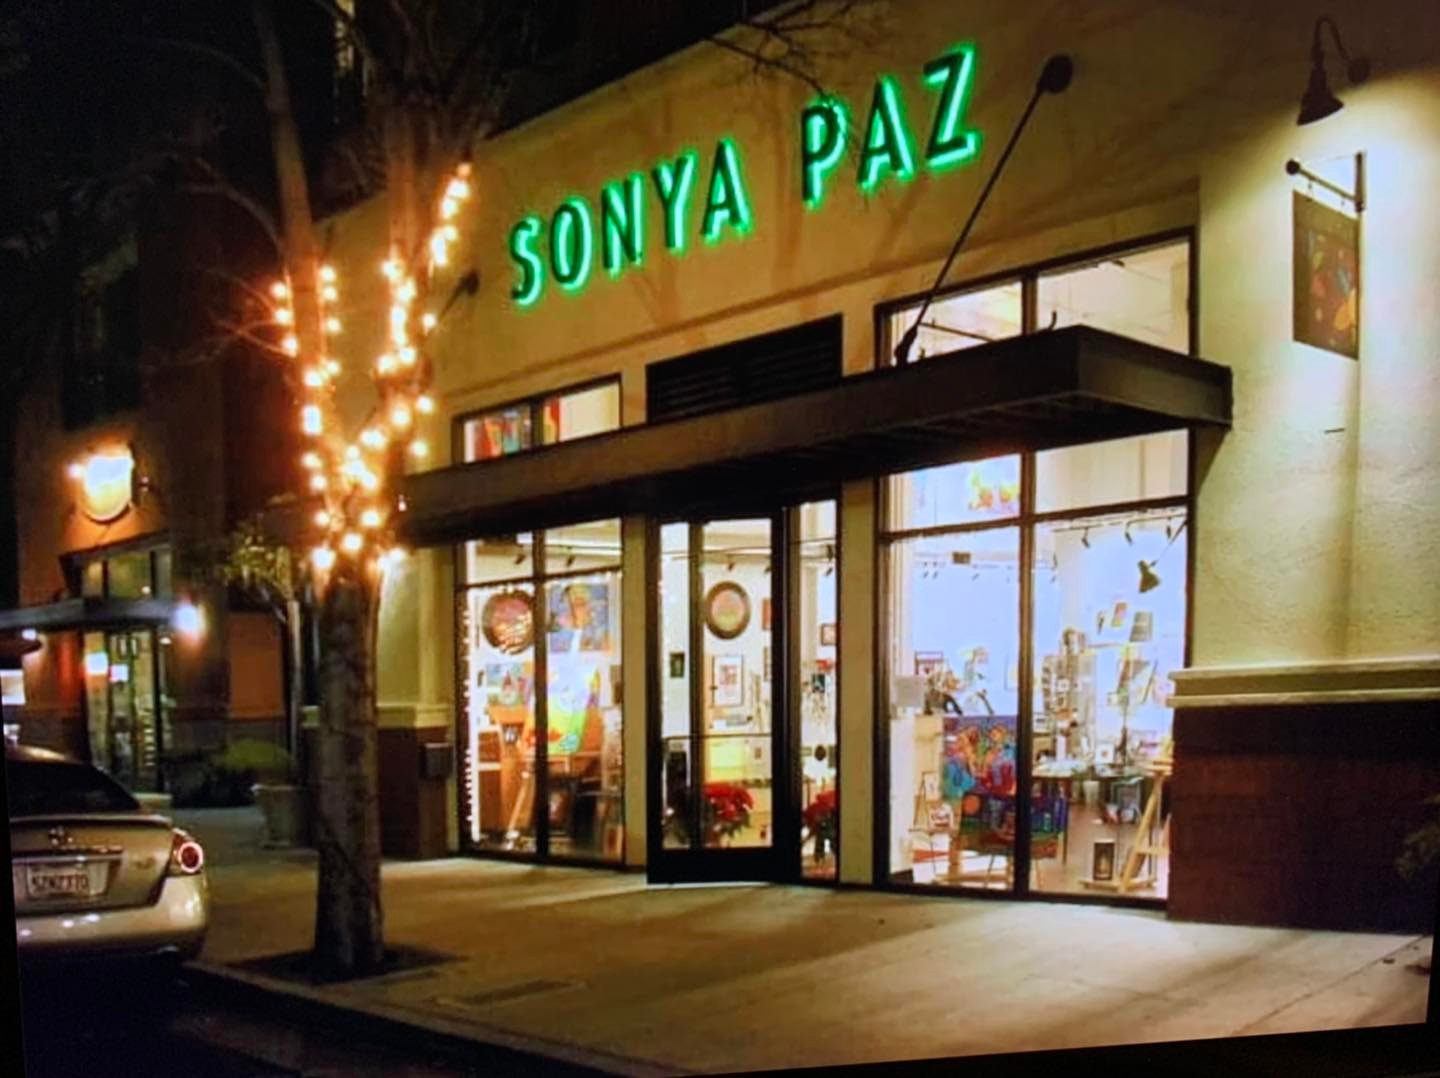 Sonya Paz Opens Up new Gallery in Downtown Campbell Historic District